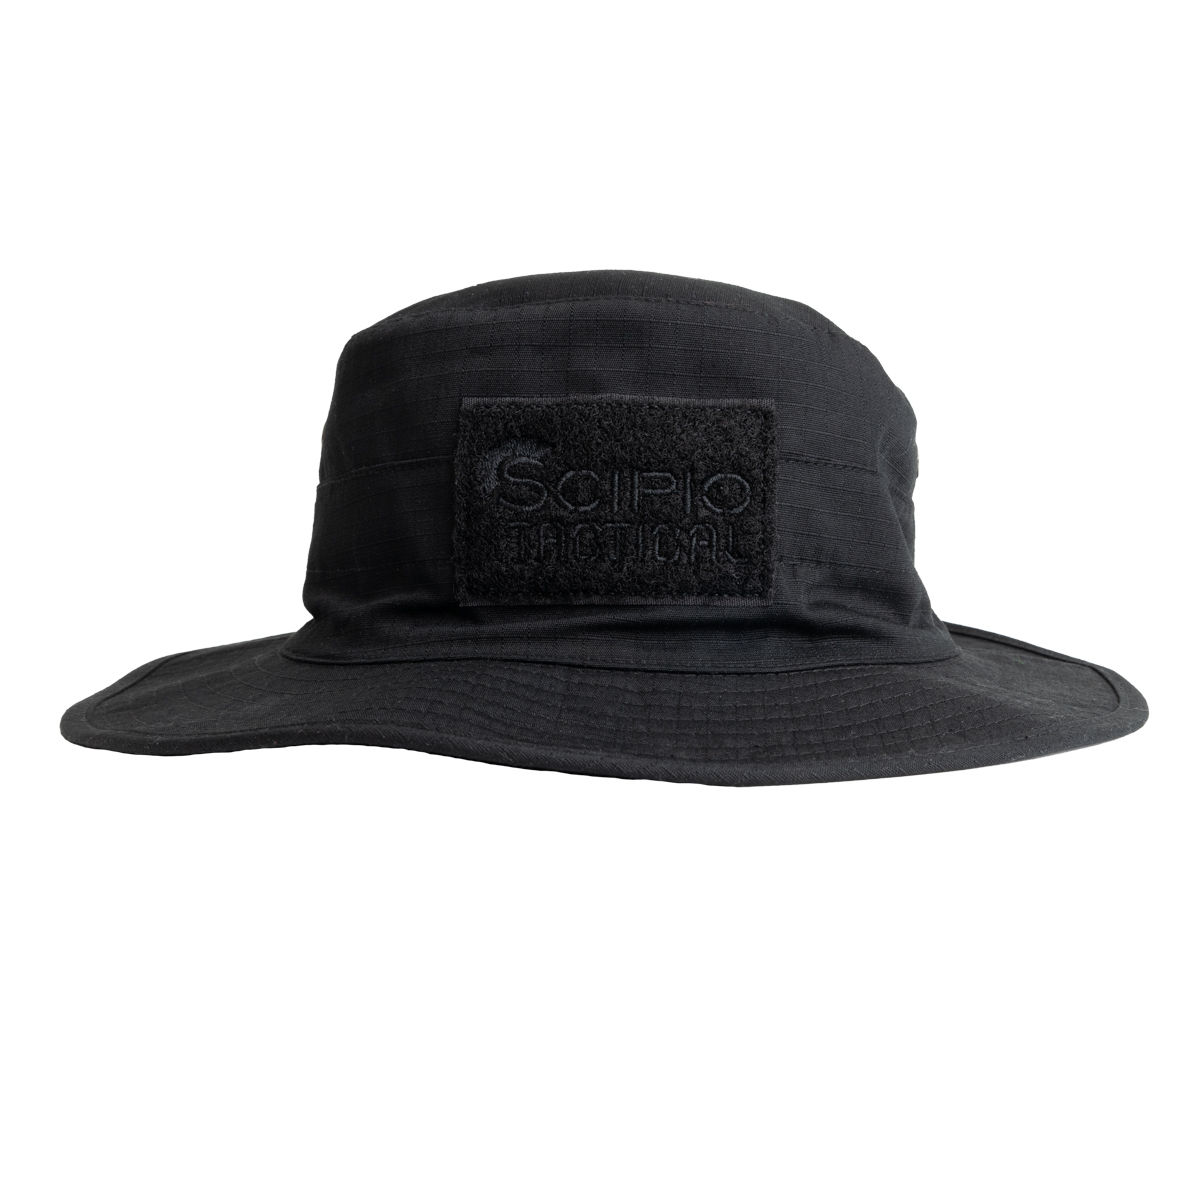 Scipio SCBUCKETBK Bucket Hat Adjustable Military-Style Boonie Hat - Ventilated Cooling Comfort Tactical Style Hat Black